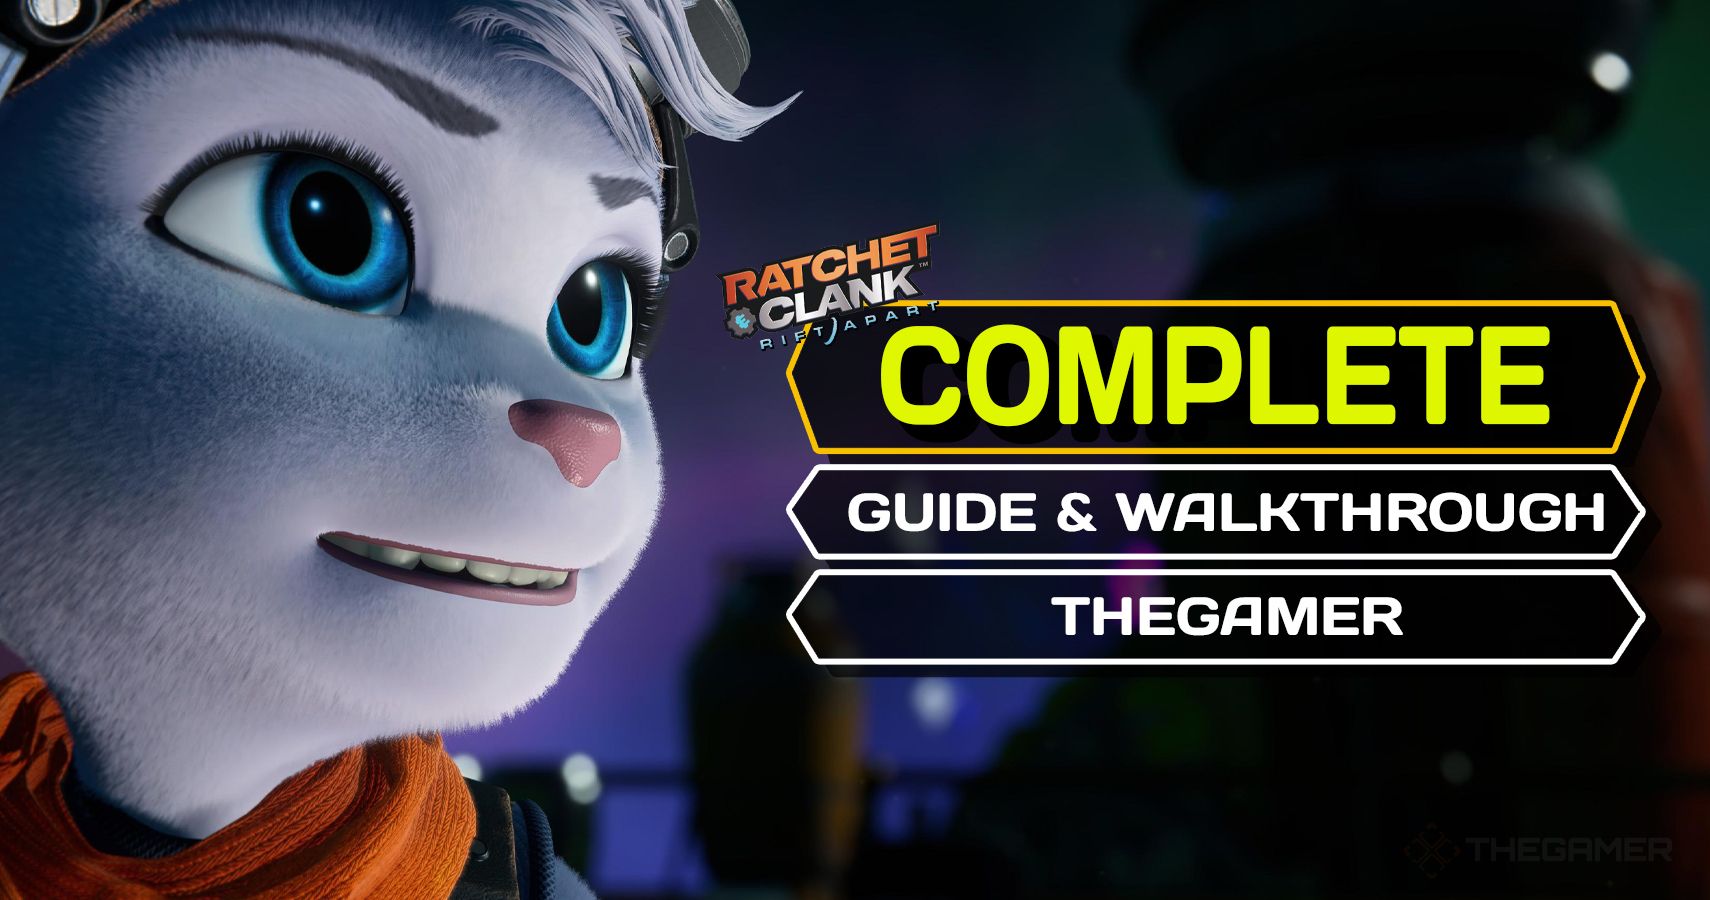 Ratchet and Clank: Rift Apart Longplay (100% Completion) (Part 1